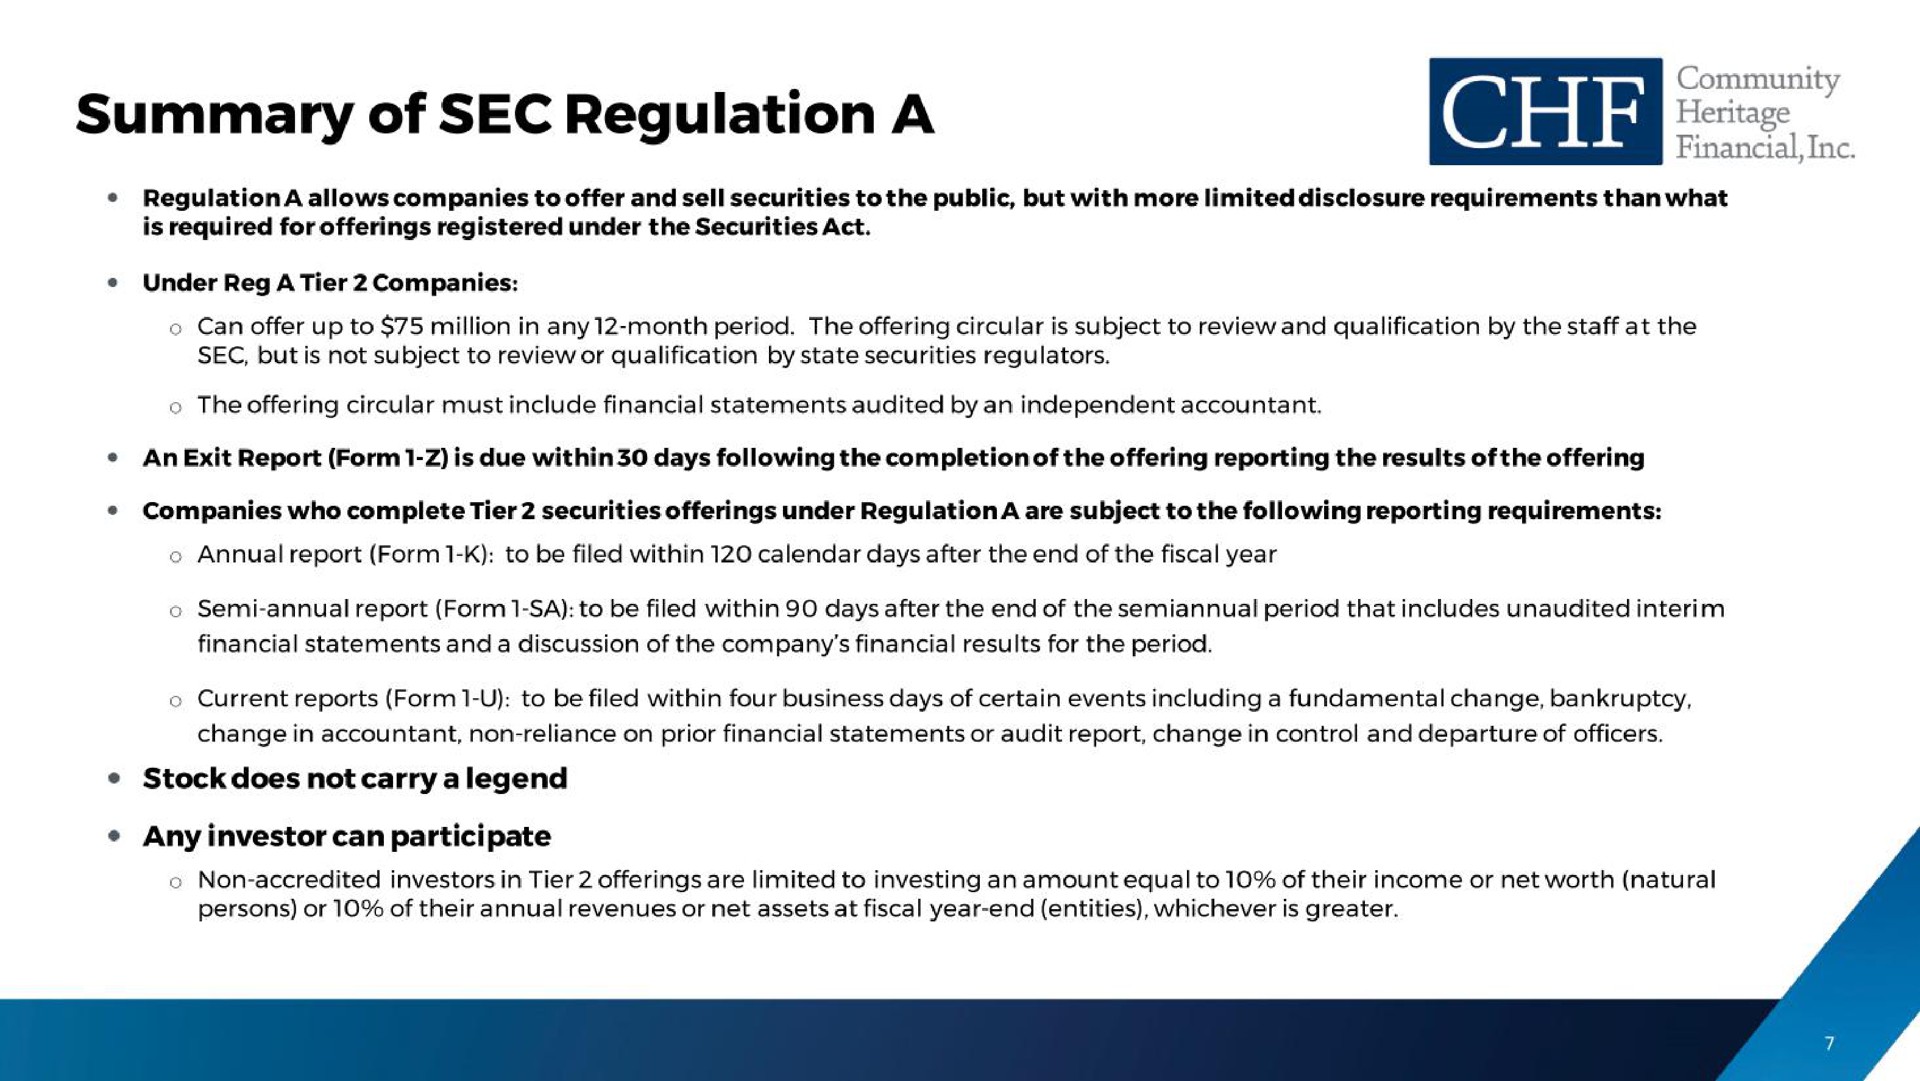 summary of sec regulation a che | Community Heritage Financial